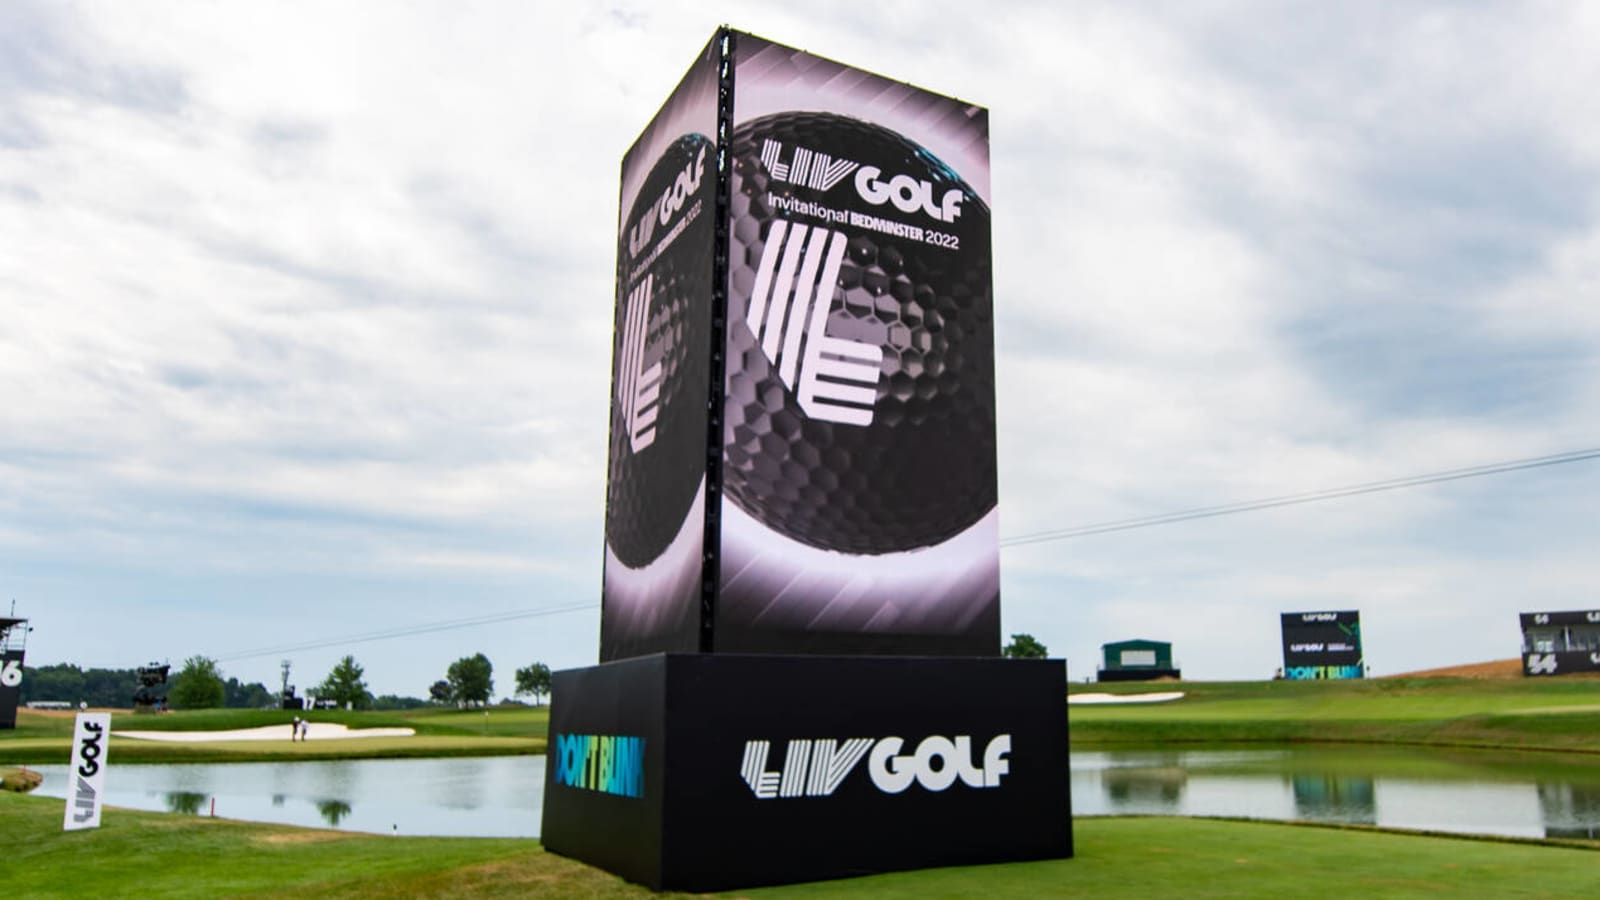 LIV Golf lawyer shares damaging contract rumor